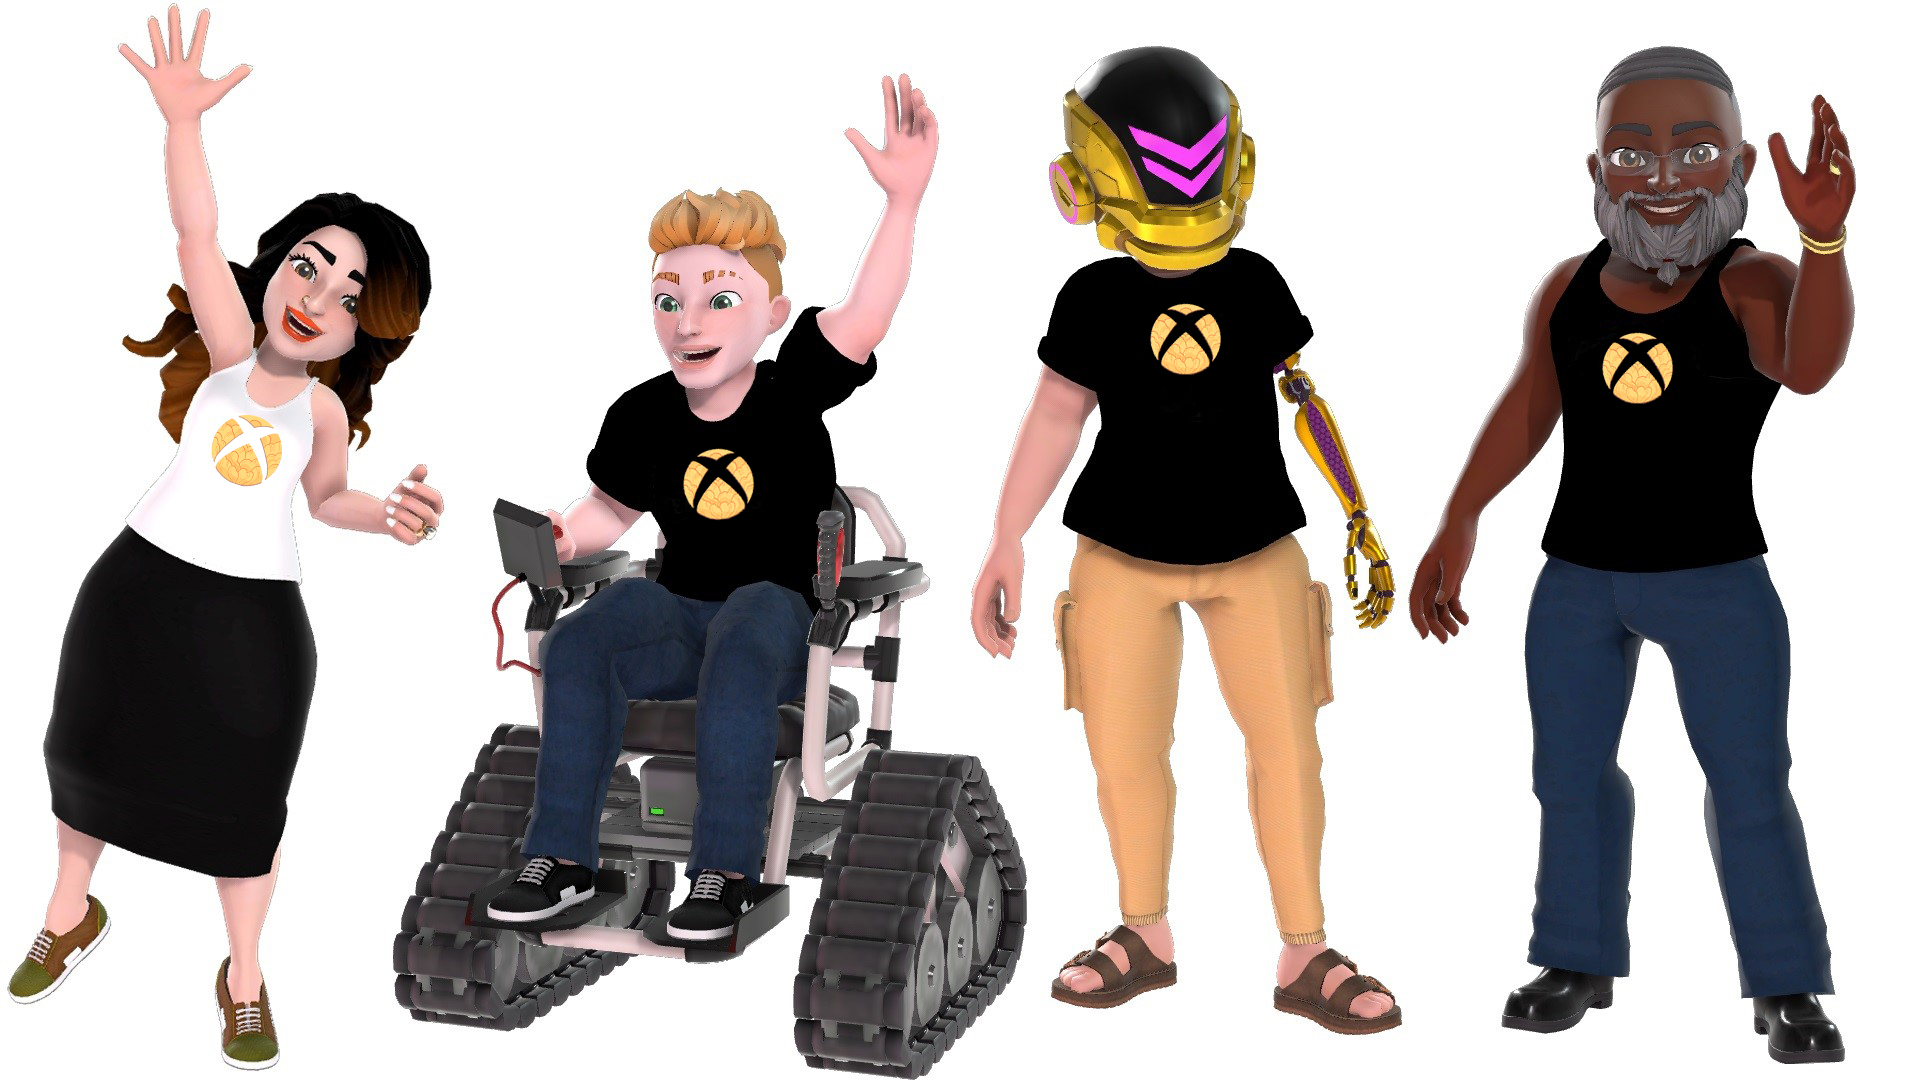 Xbox Avatars wearing black shirts that feature the stylized Xbox logo for the gaming and disability community 2023 campaign.